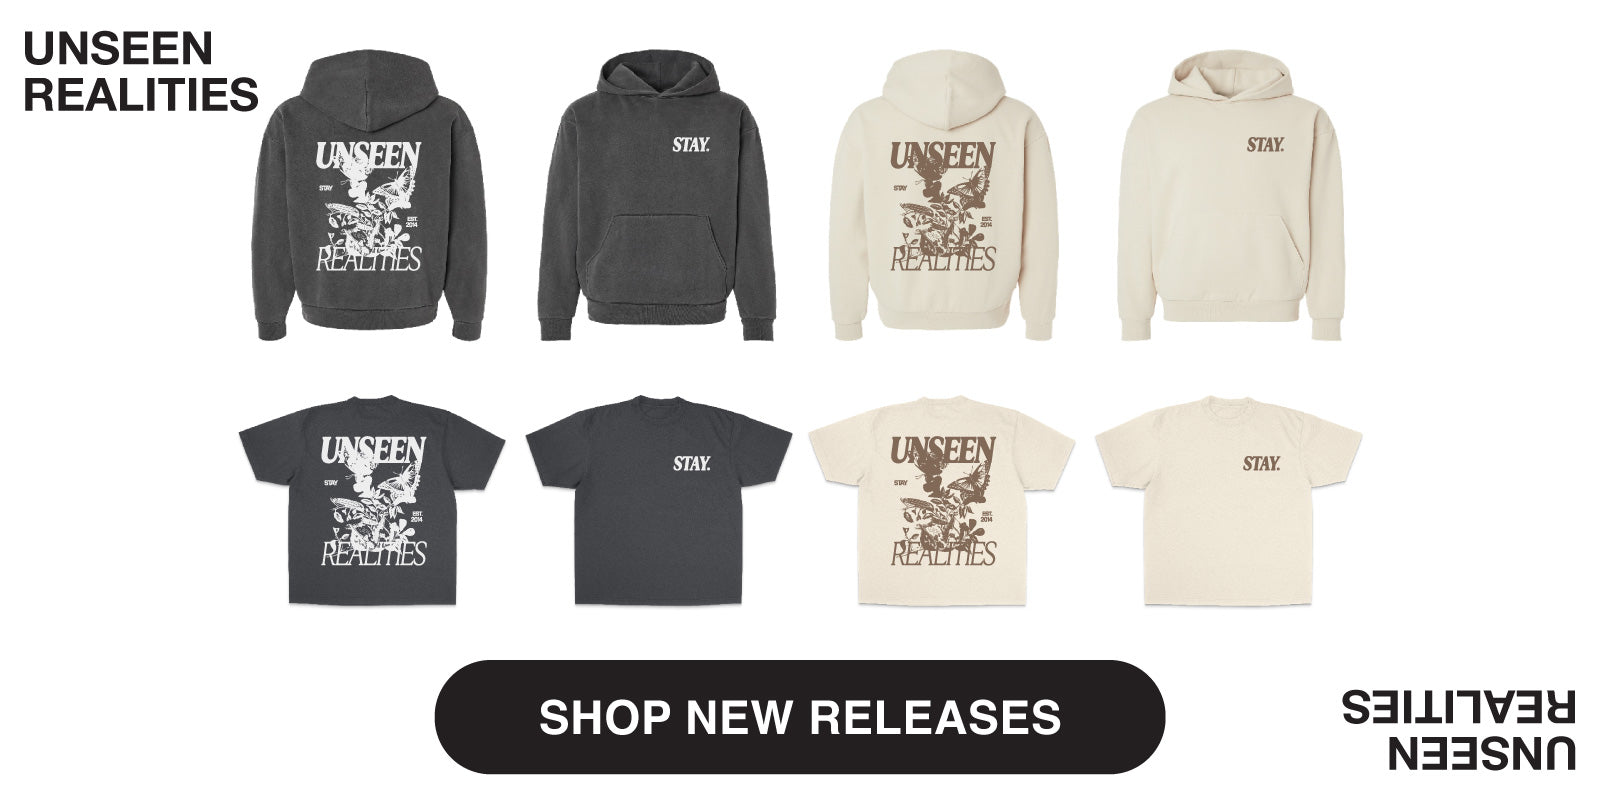 SHOP NEW RELEASES